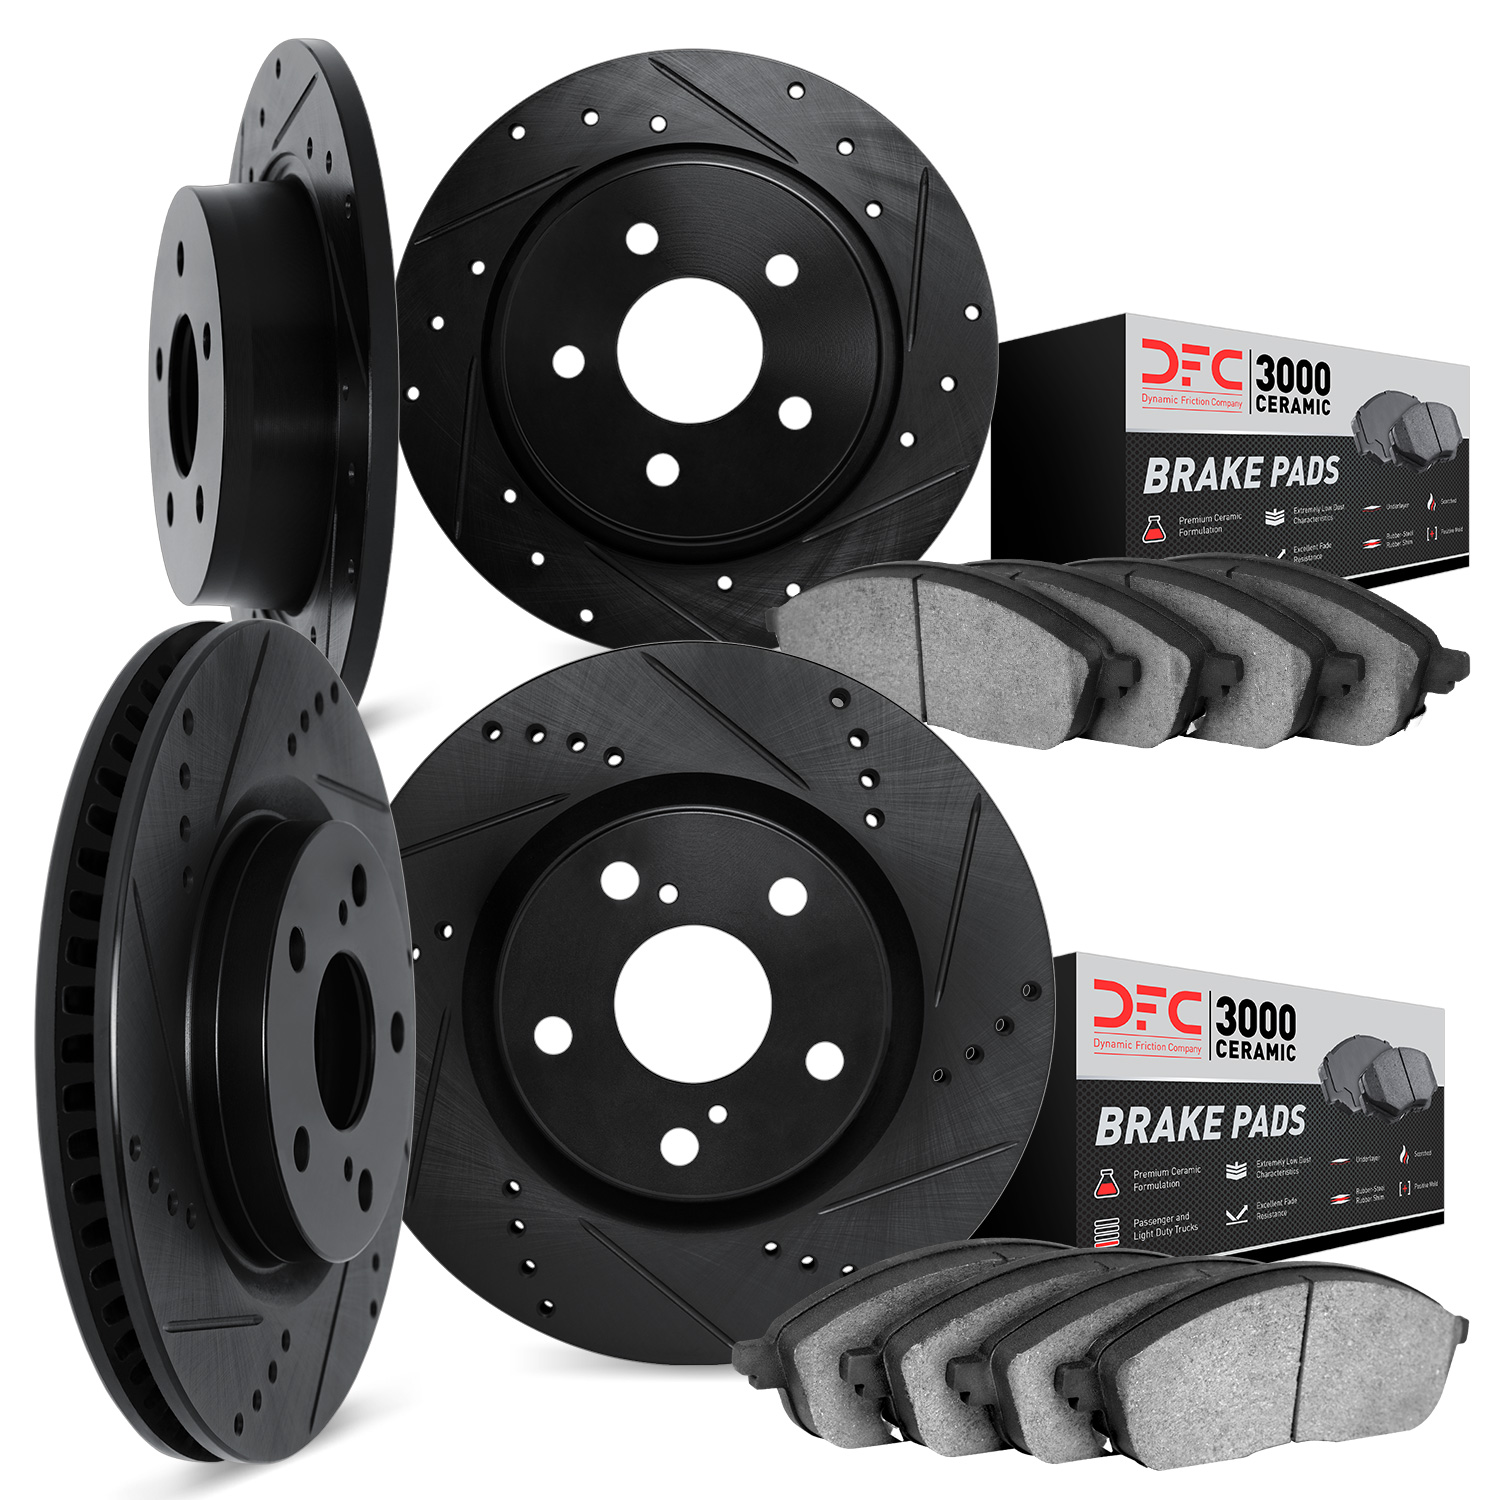 8304-59028 Drilled/Slotted Brake Rotors with 3000-Series Ceramic Brake Pads Kit [Black], 2002-2004 Acura/Honda, Position: Front